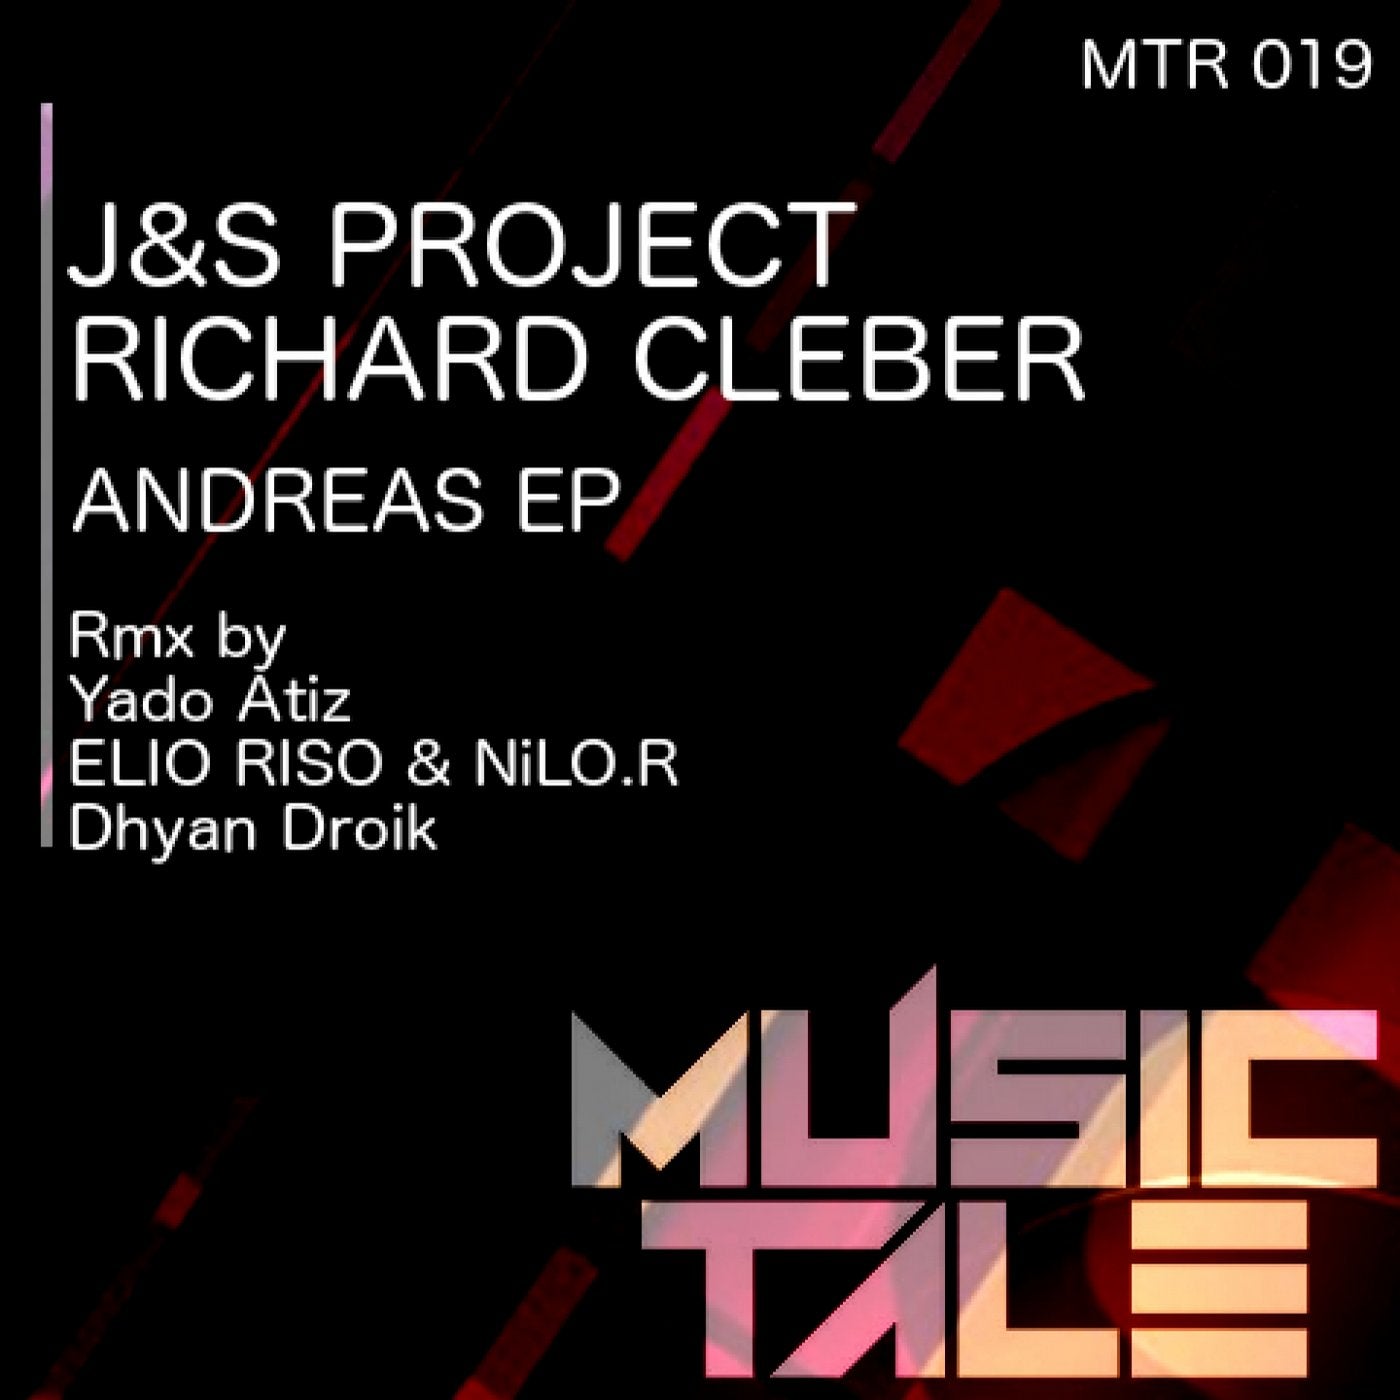 Andreas EP